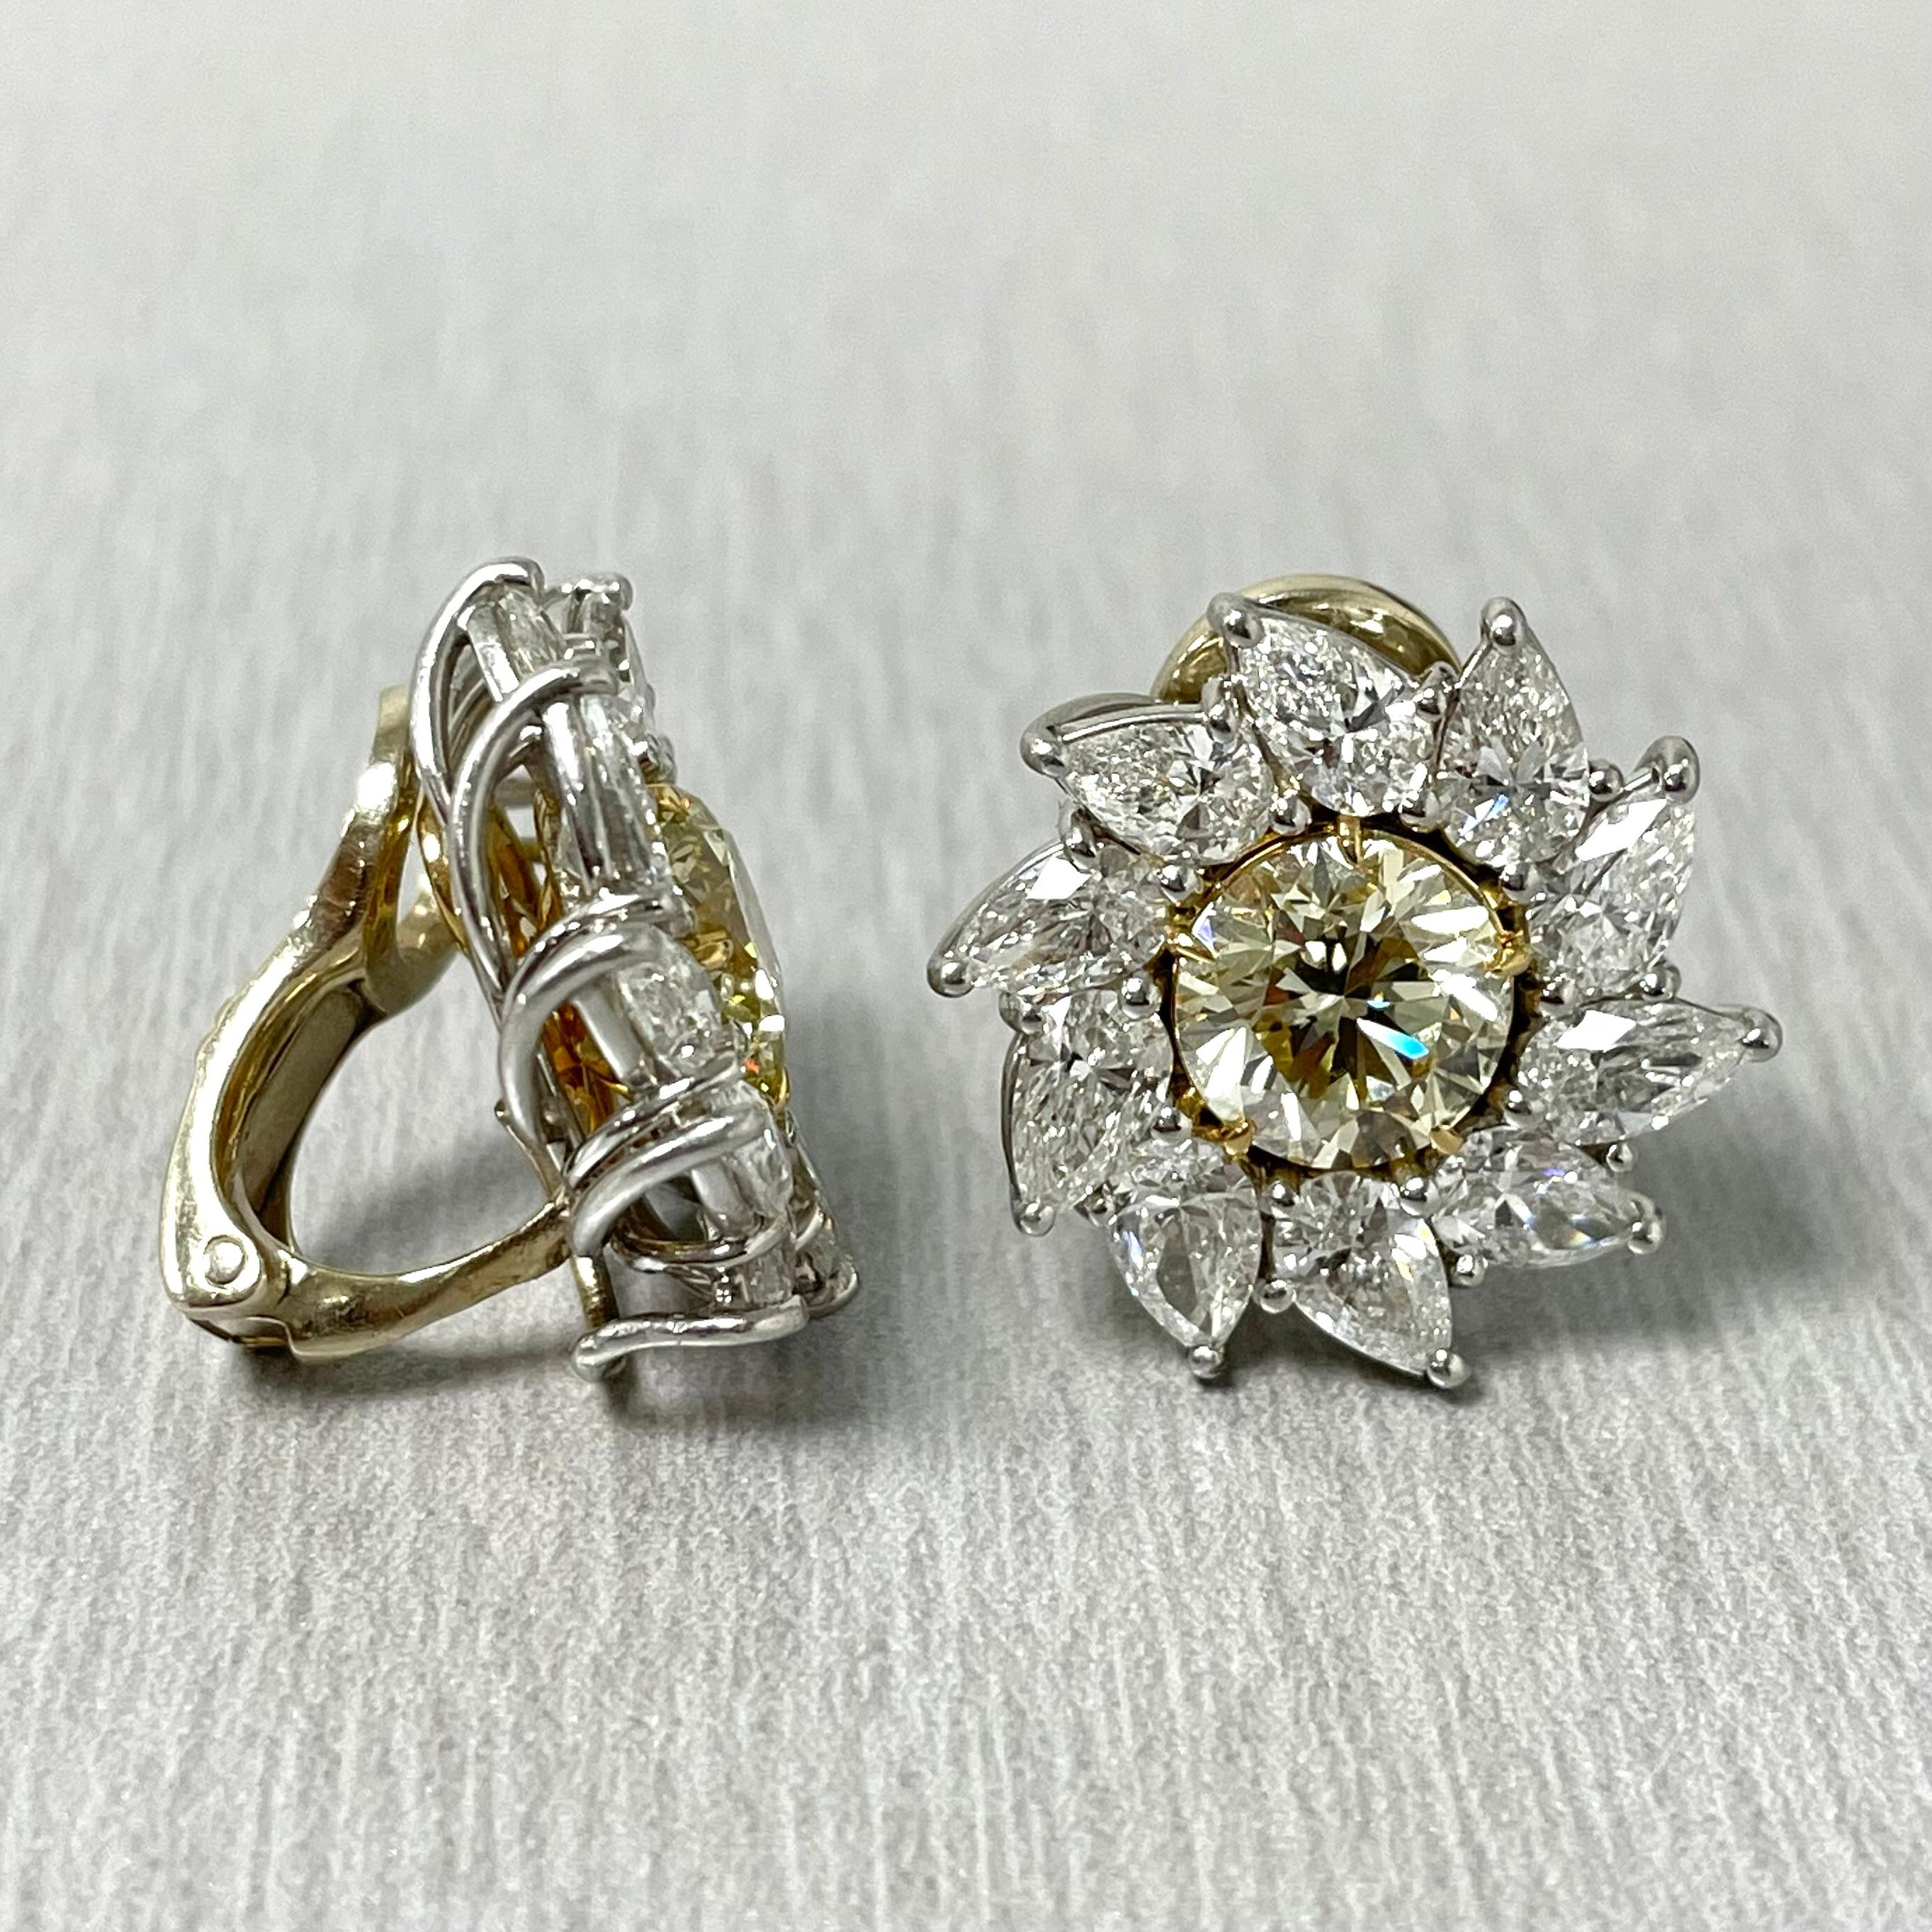 Radiance Diamond Stud Earrings '7.58 Carat Diamonds' in Platinum & Gold In New Condition For Sale In New York, NY